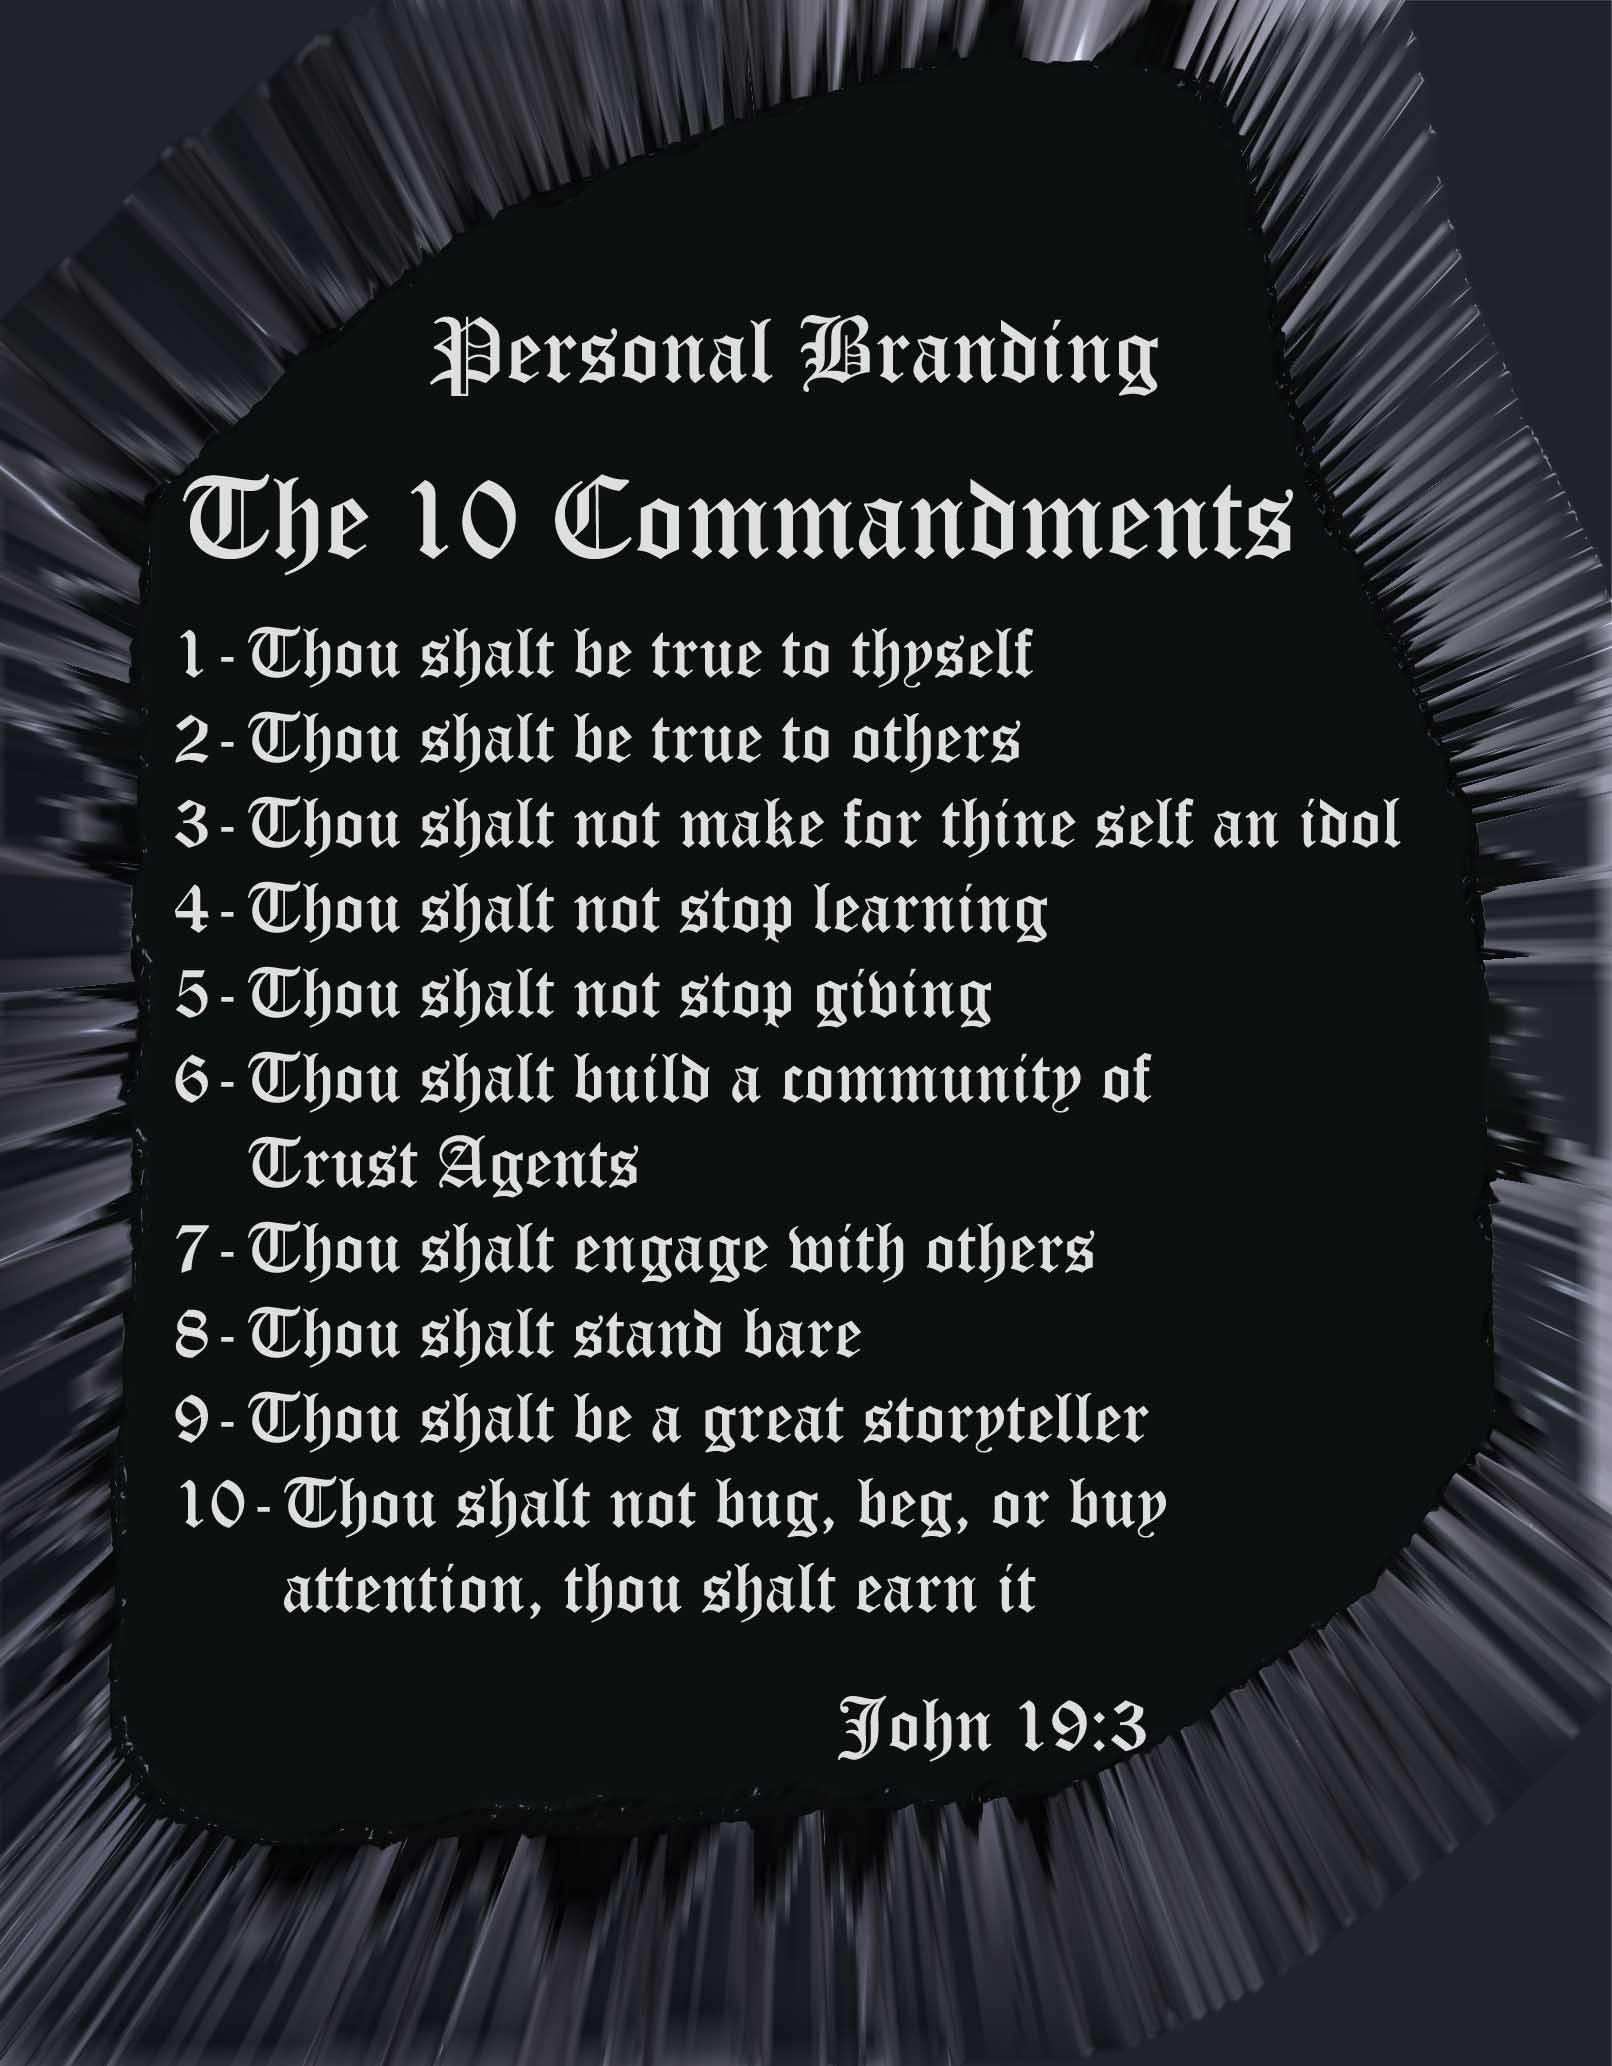 The 10 commandments of Personal Branding